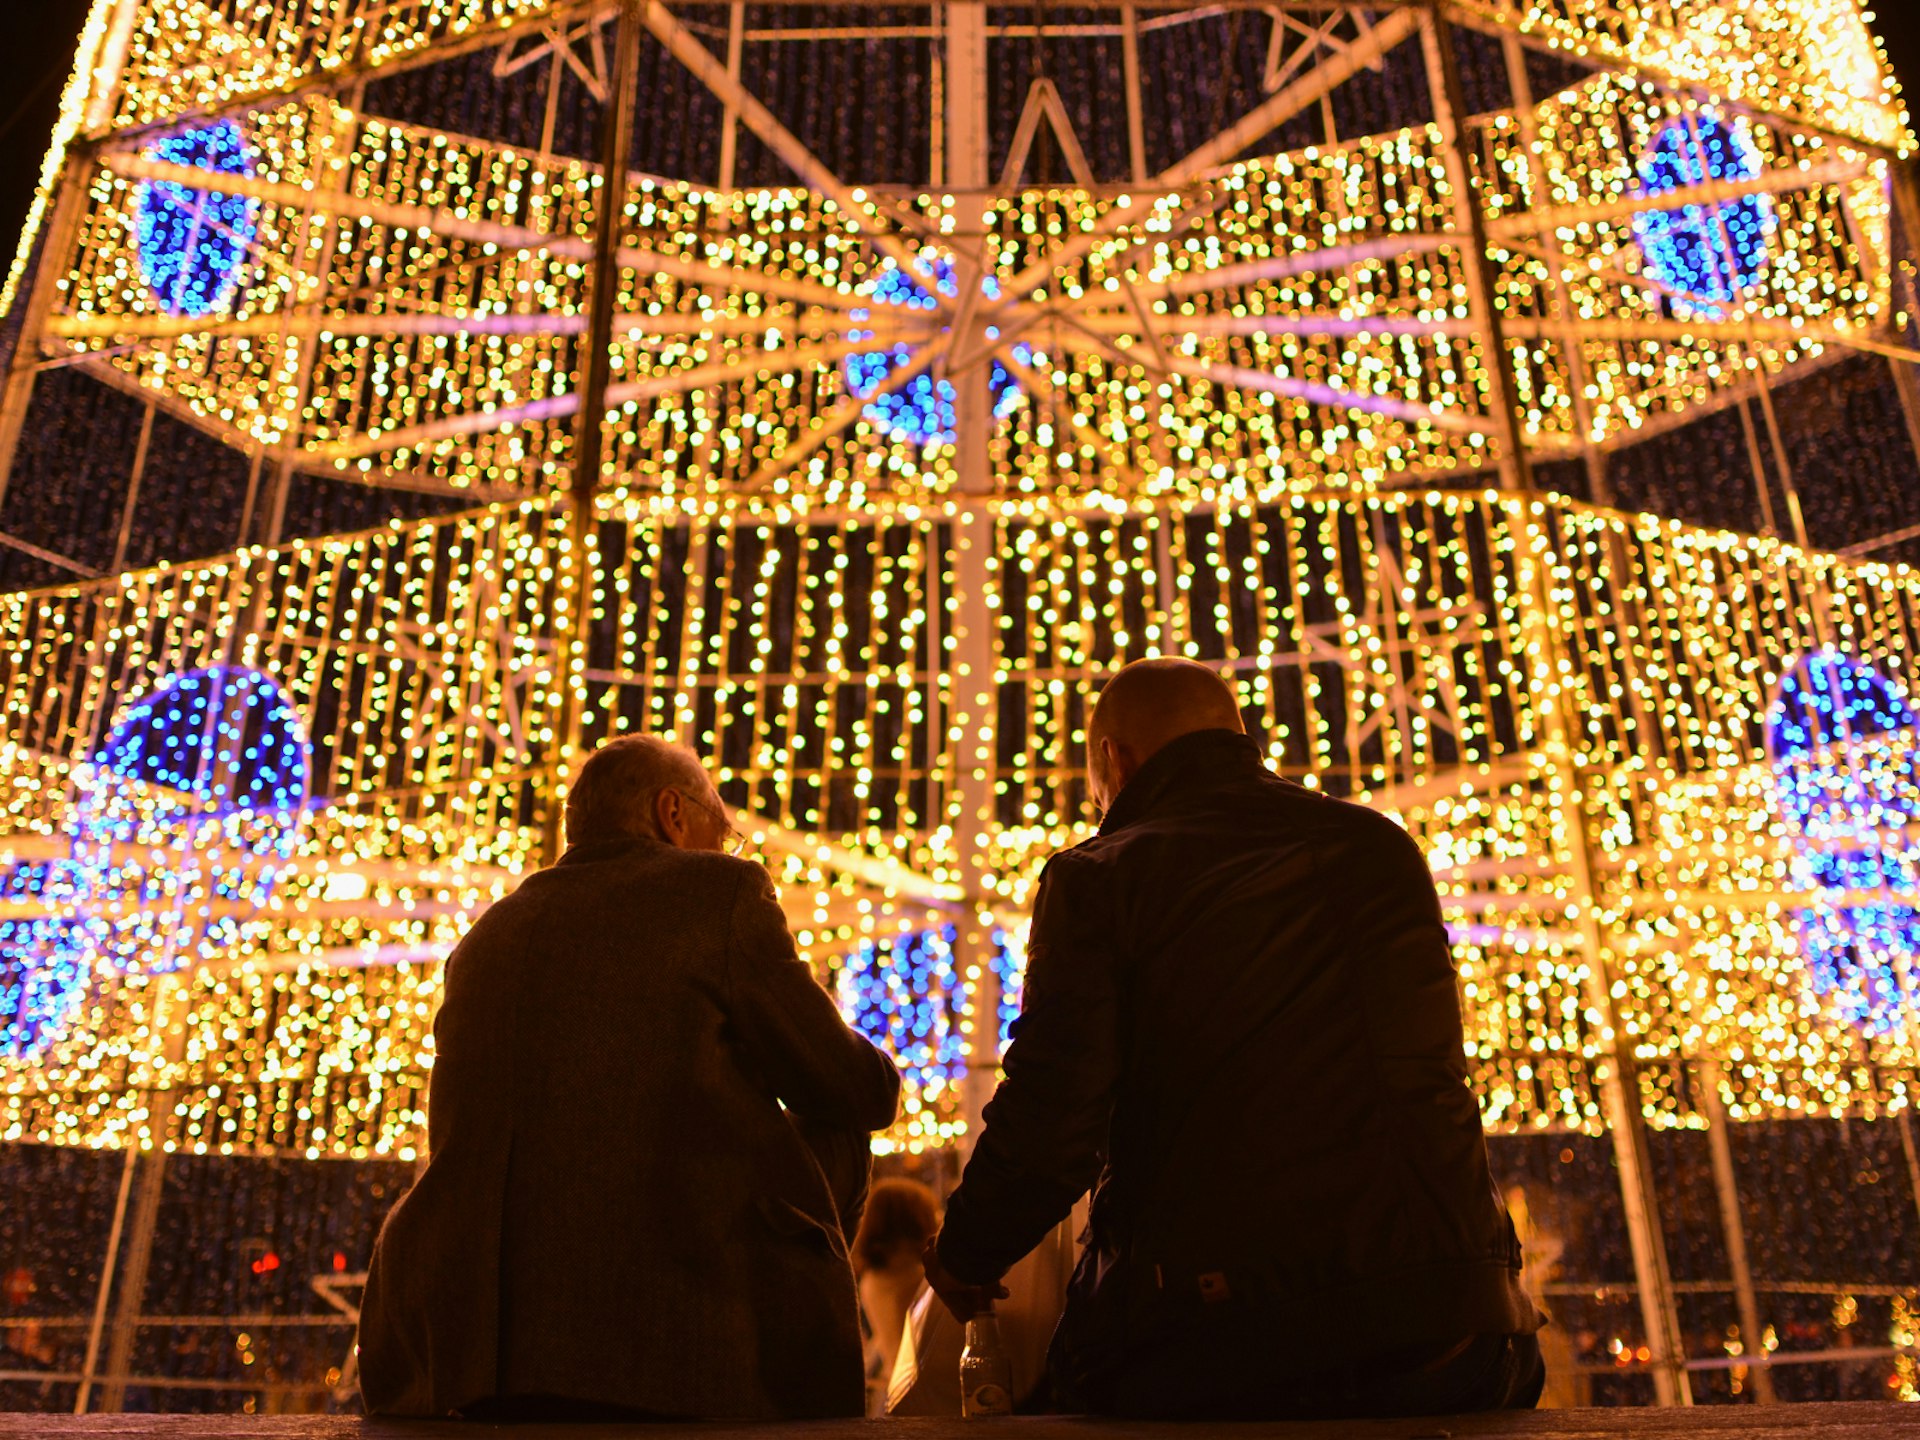 Two men sit in front of a Christmas tree made of lights in Porto, Portugal